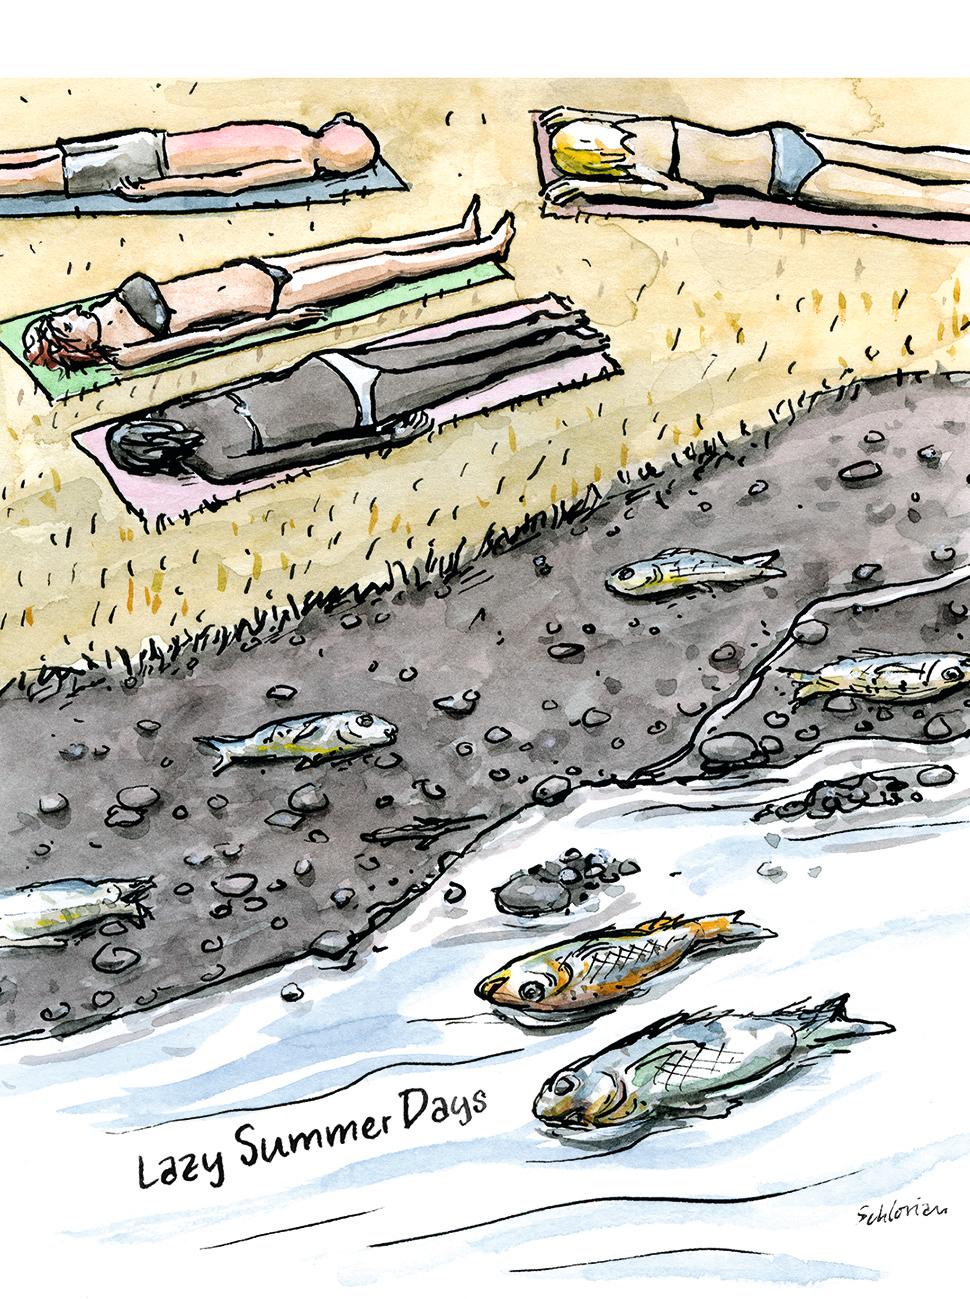 People sunbathing and fish dying in river